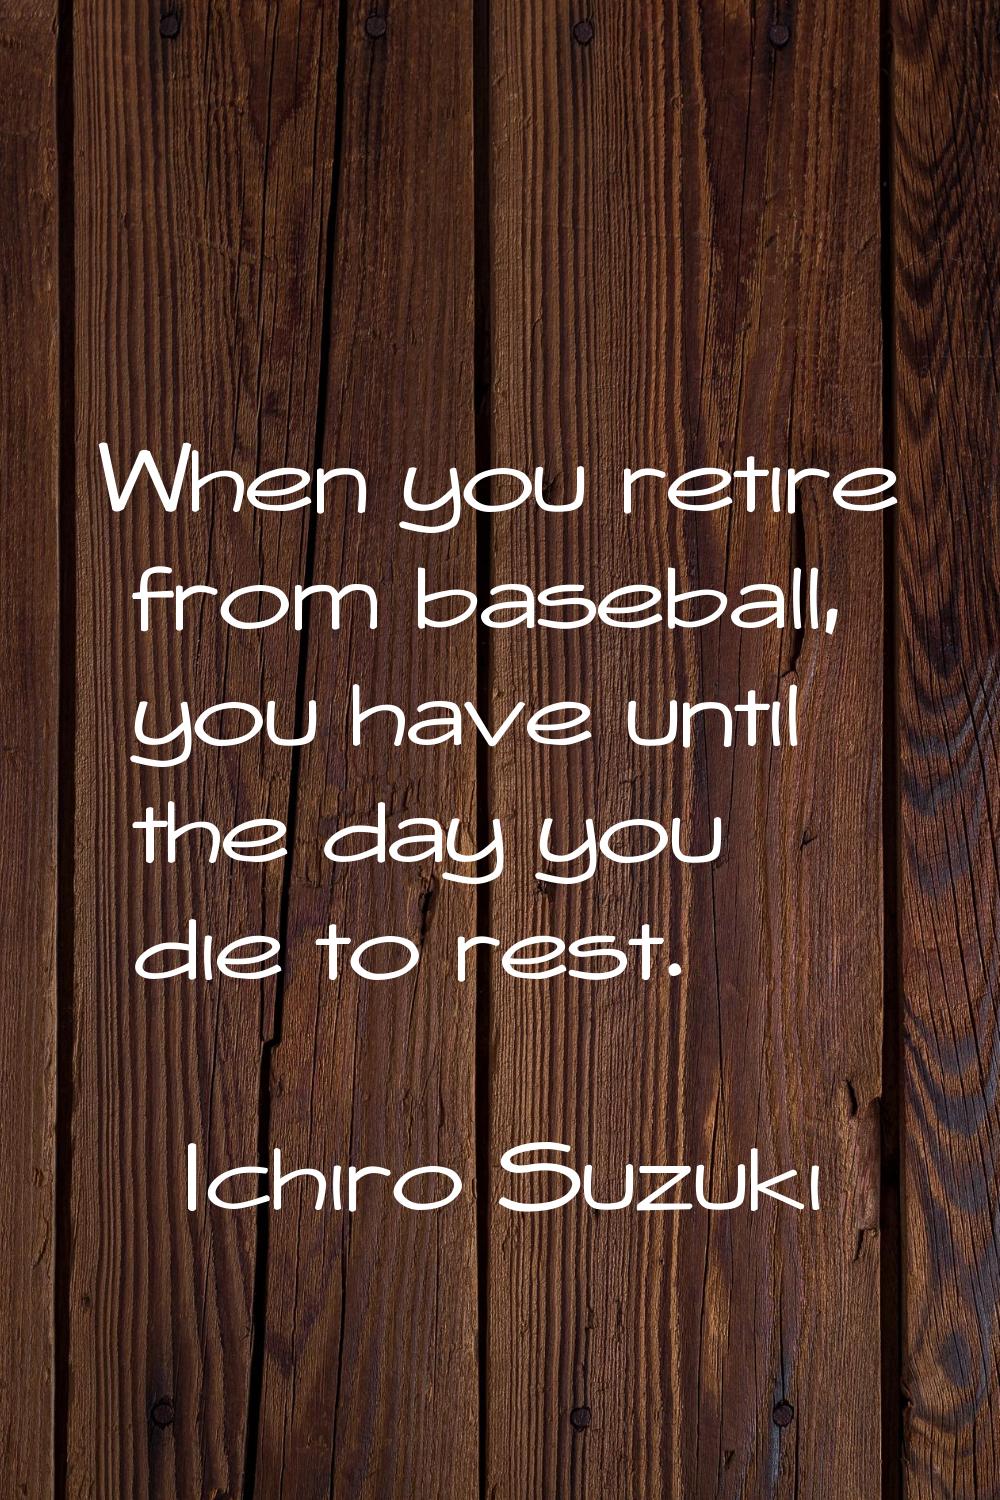 When you retire from baseball, you have until the day you die to rest.